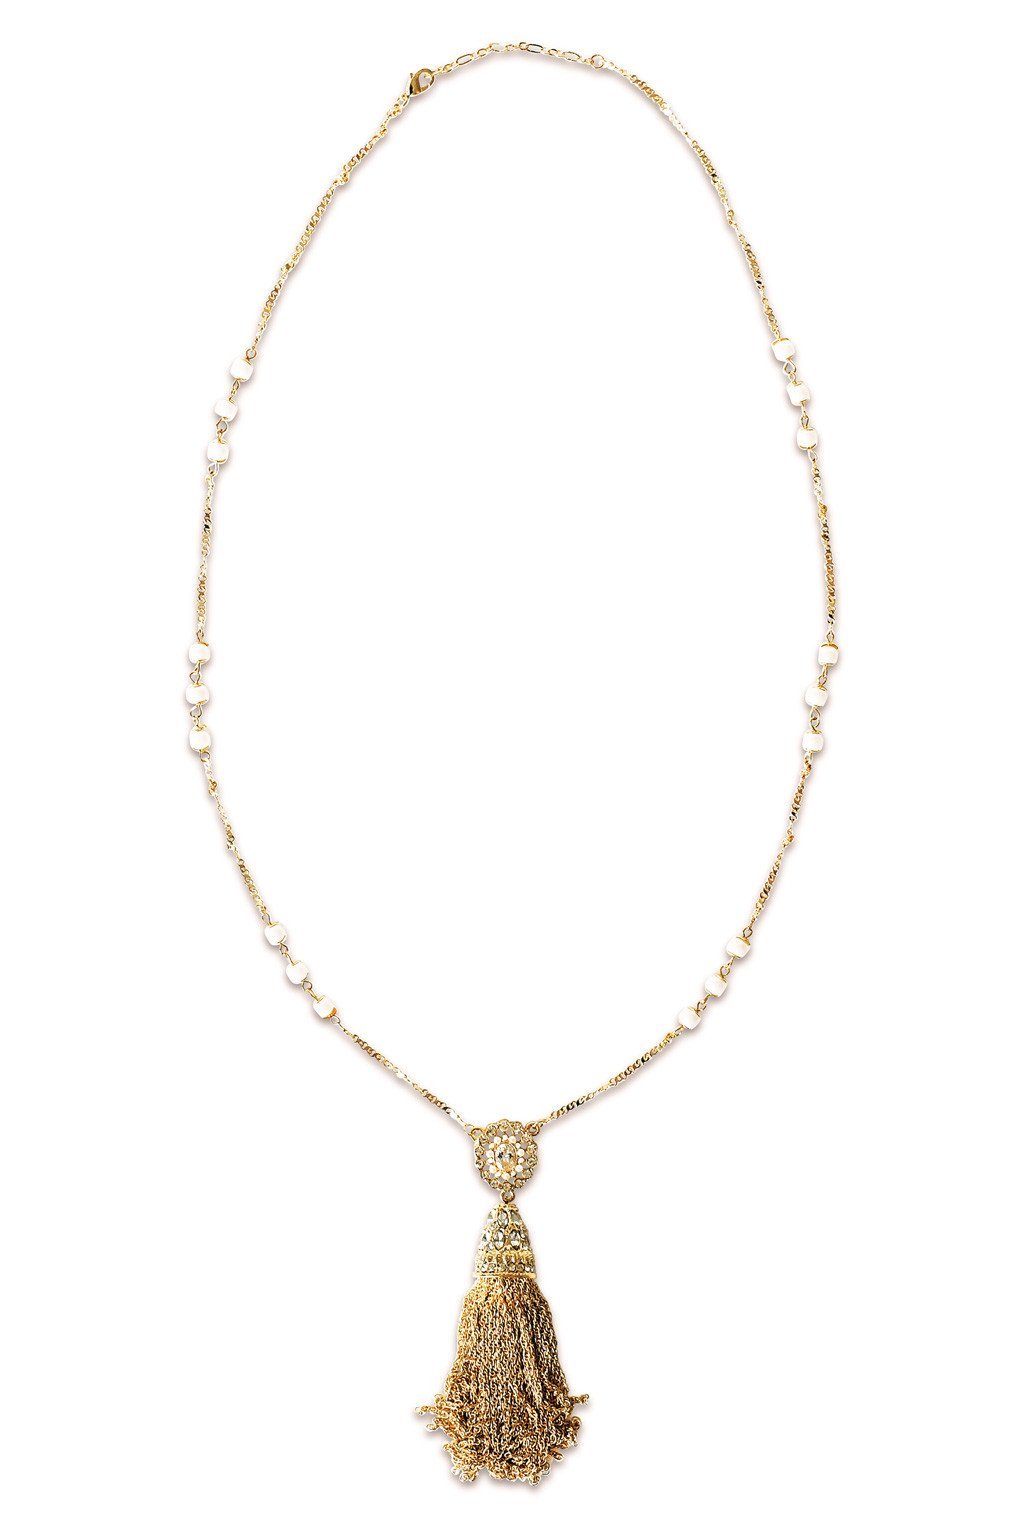 Gold Tassel Necklace - Two Penny Blue